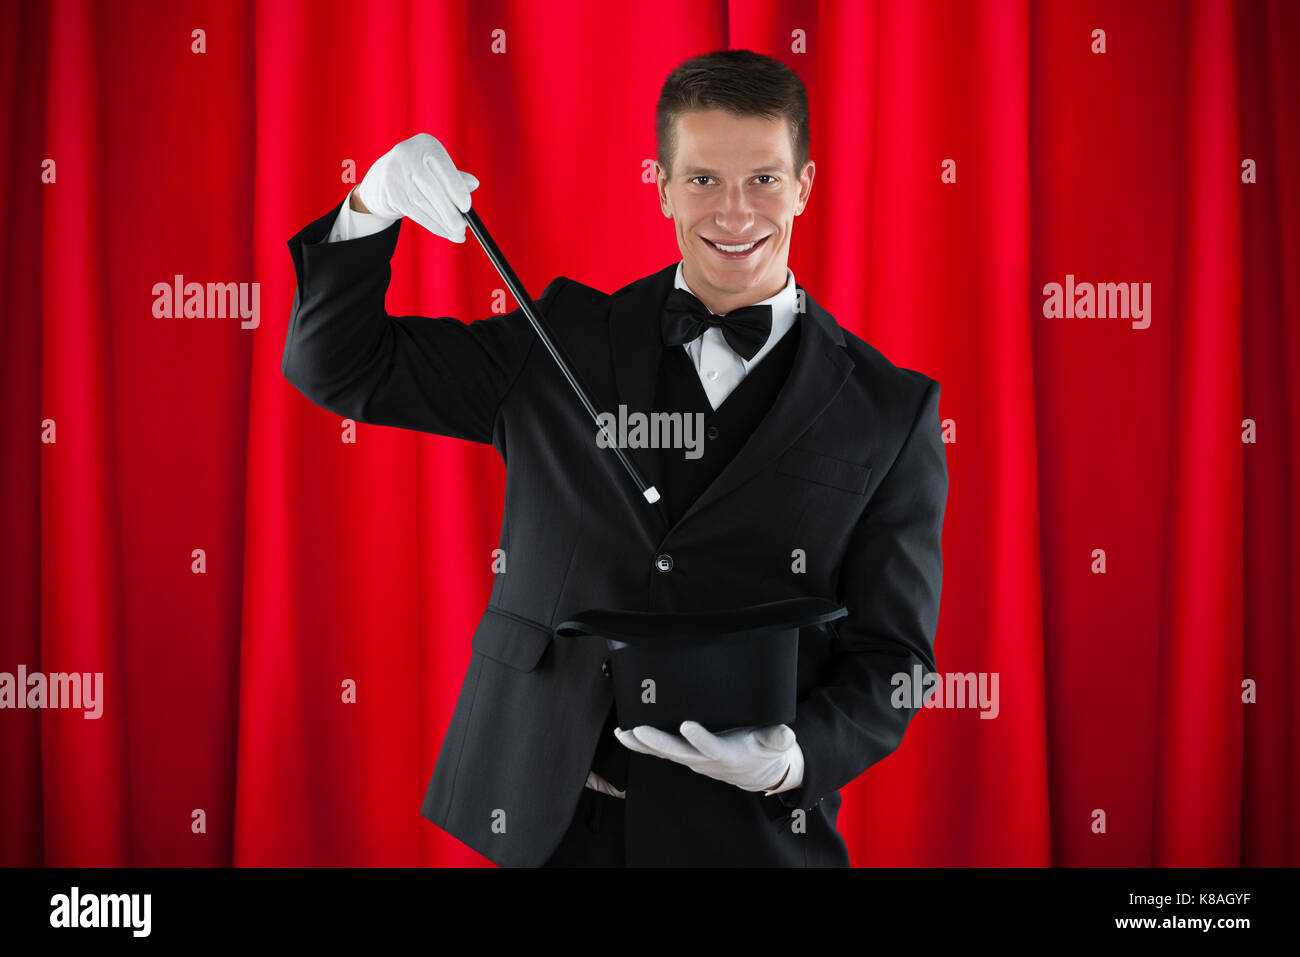 Young Happy Magician Showing Magic Trick With Hat Stock Photo